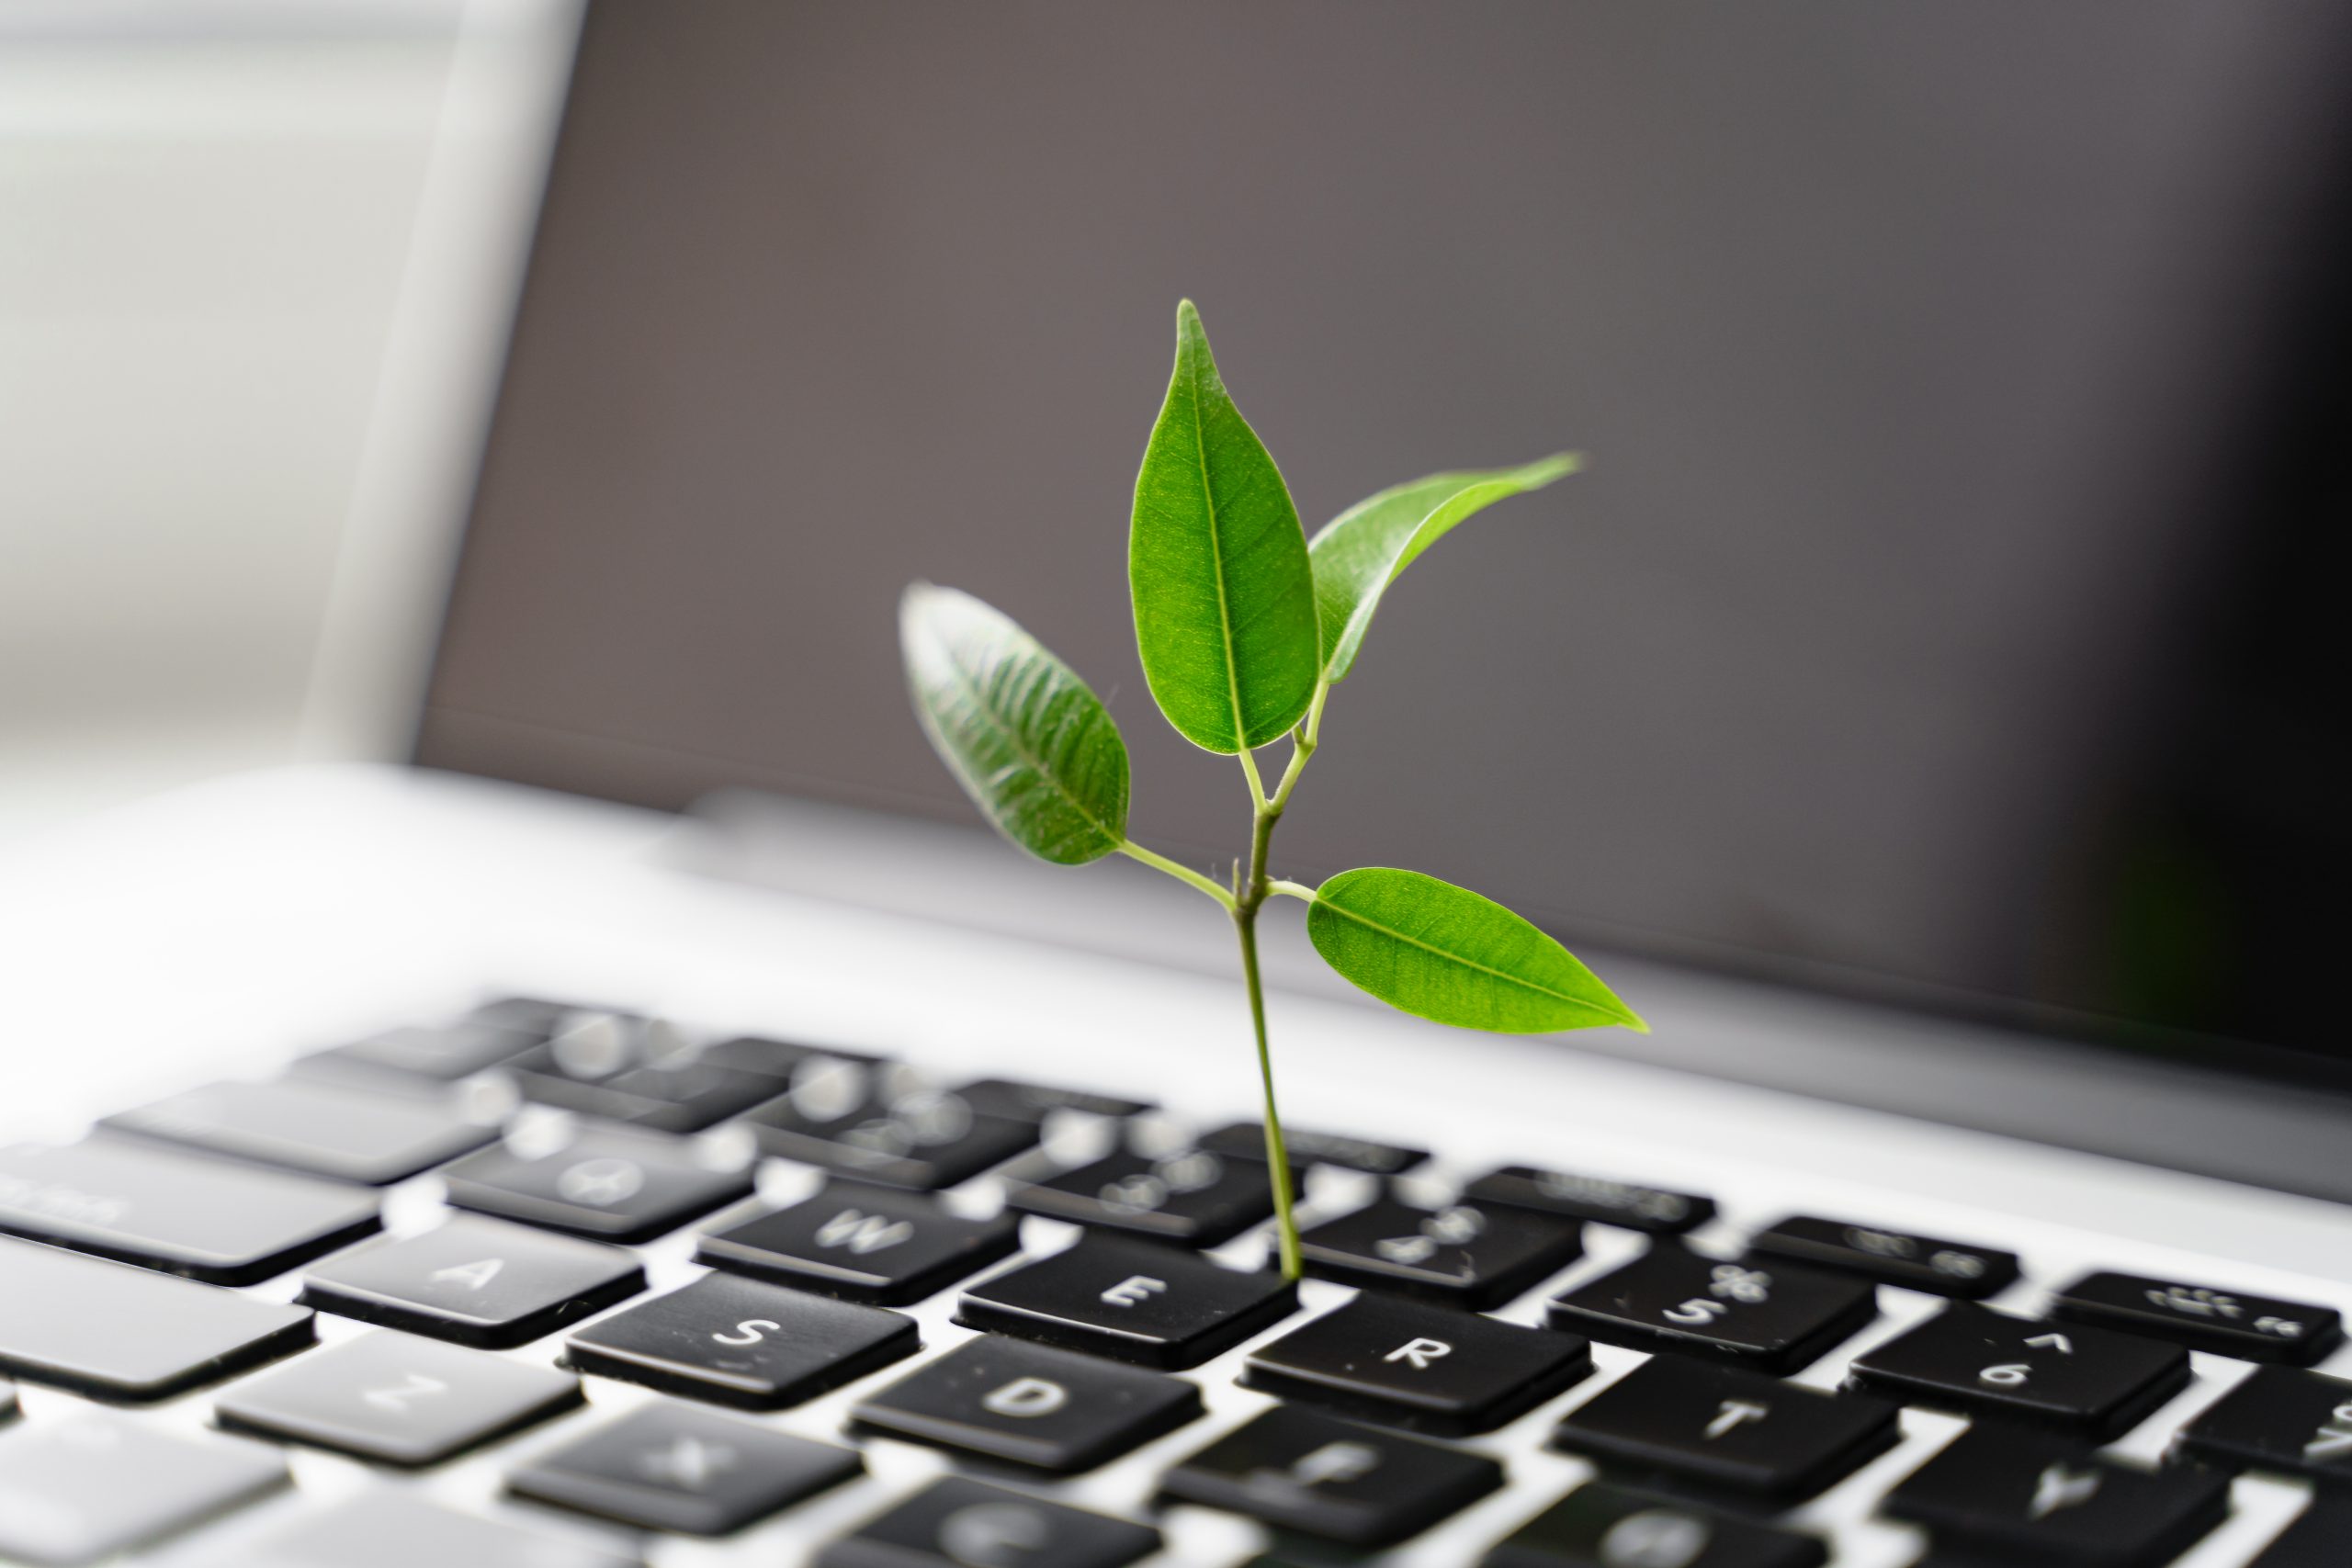 Laptop,Keyboard,With,Plant,Growing,On,It.,Green,It,Computing